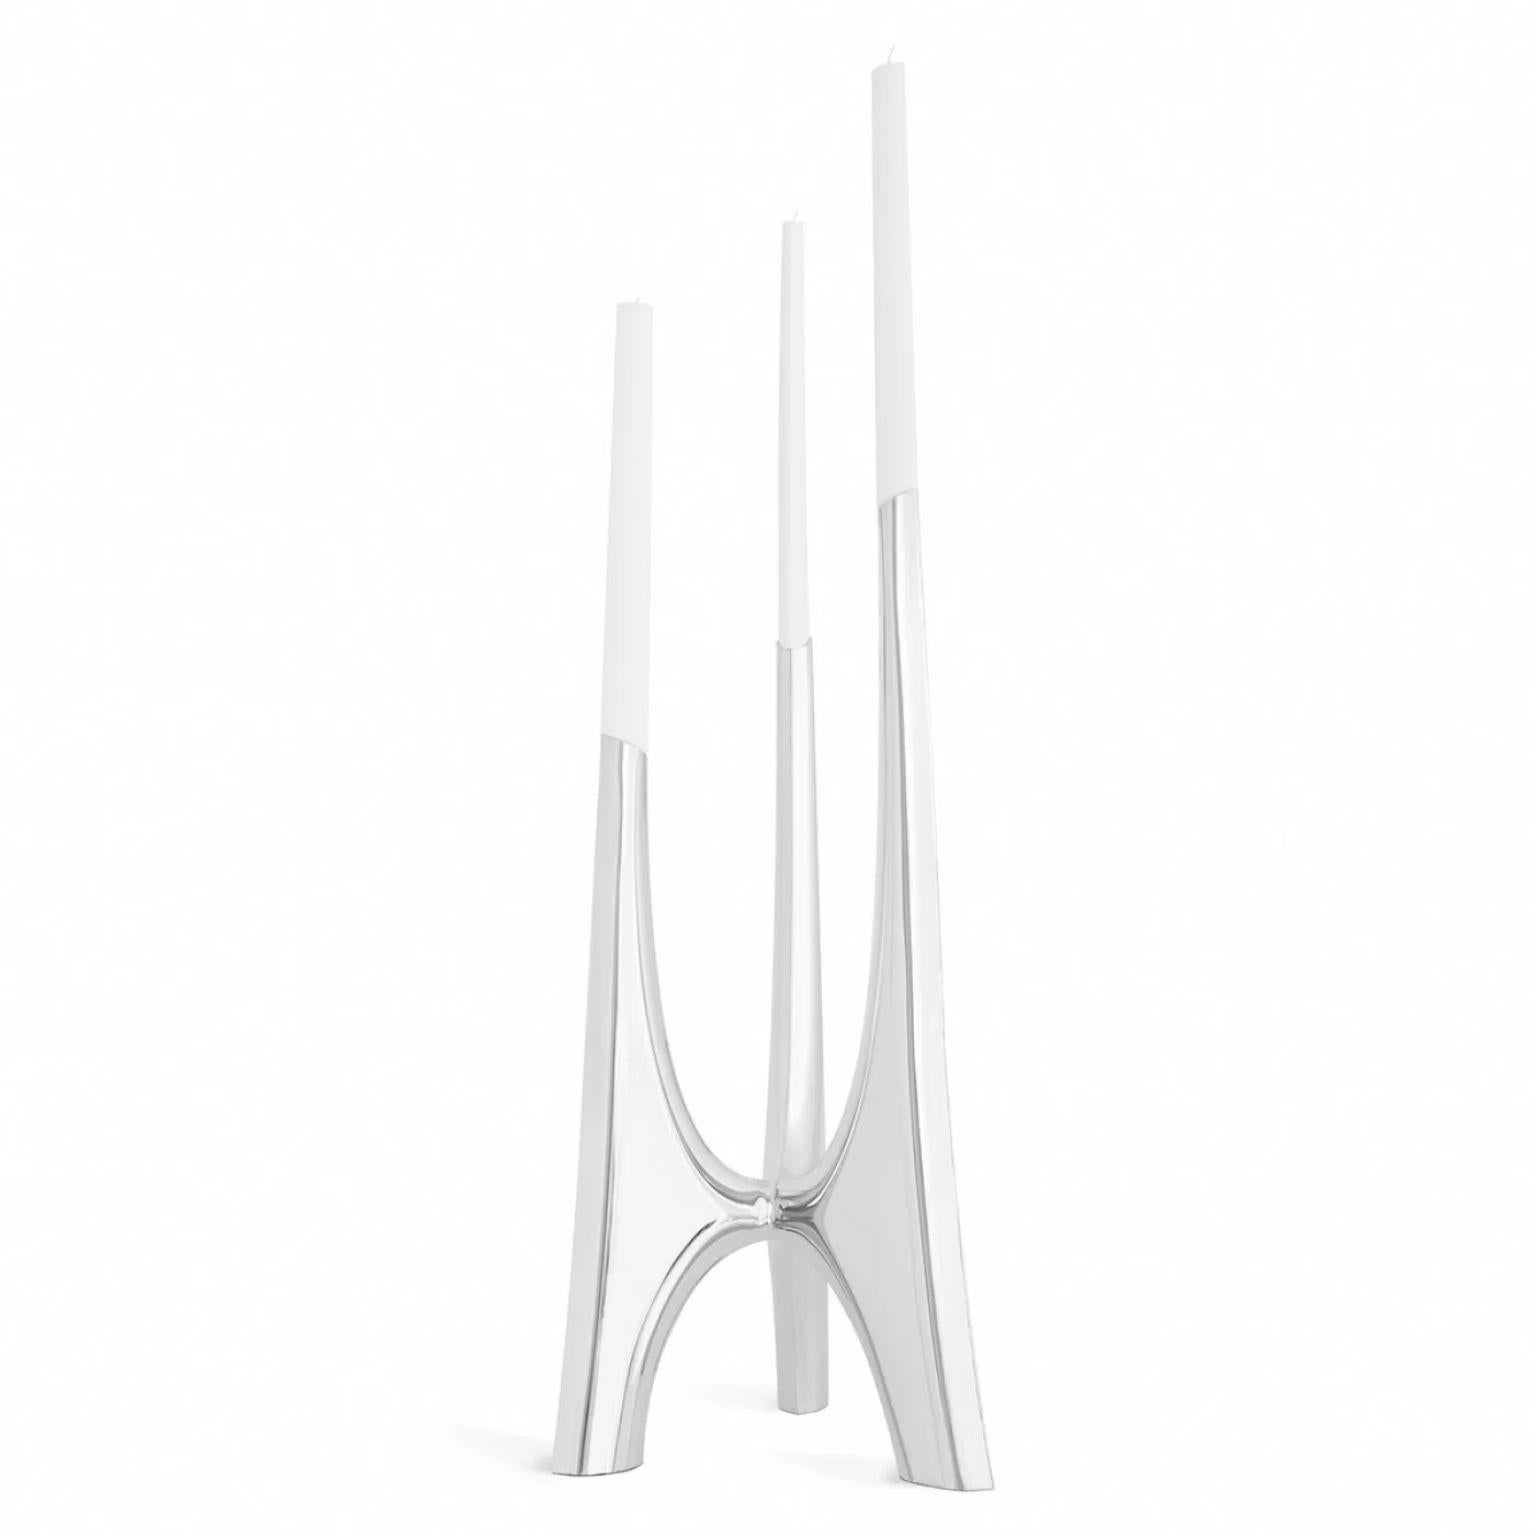 Triglav 83 Candleholder by Zieta
Dimensions: D 40 x W 40 x H 83 cm.
Material: Polished stainless steel. 

Also available in a smaller version. Candles included. Please contact us. 

Triglav is a steel candle holder from Zieta Studio, designed by